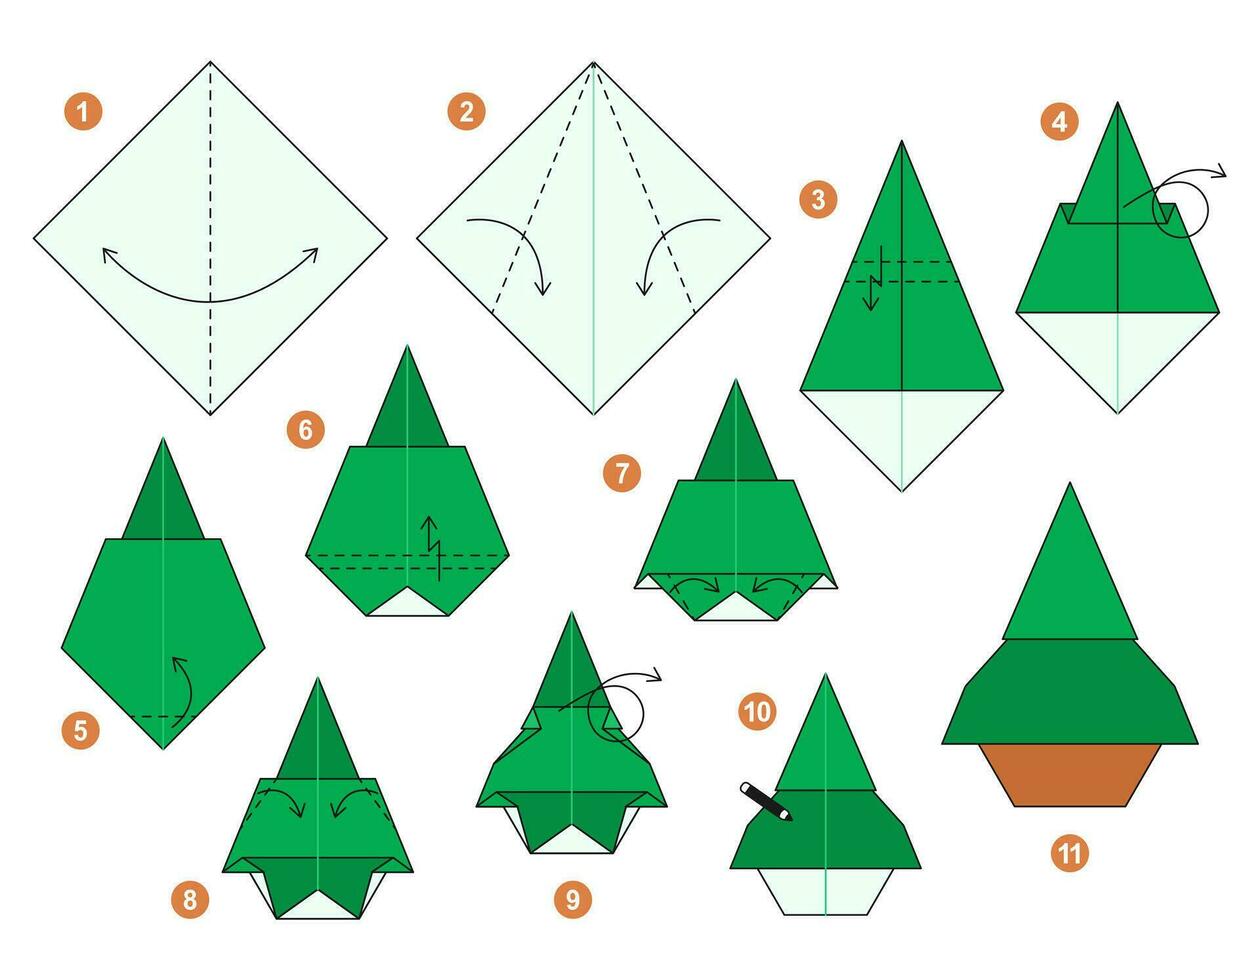 Fir origami scheme tutorial moving model. Origami for kids. Step by step how to make a cute origami fir-tree. Vector illustration.